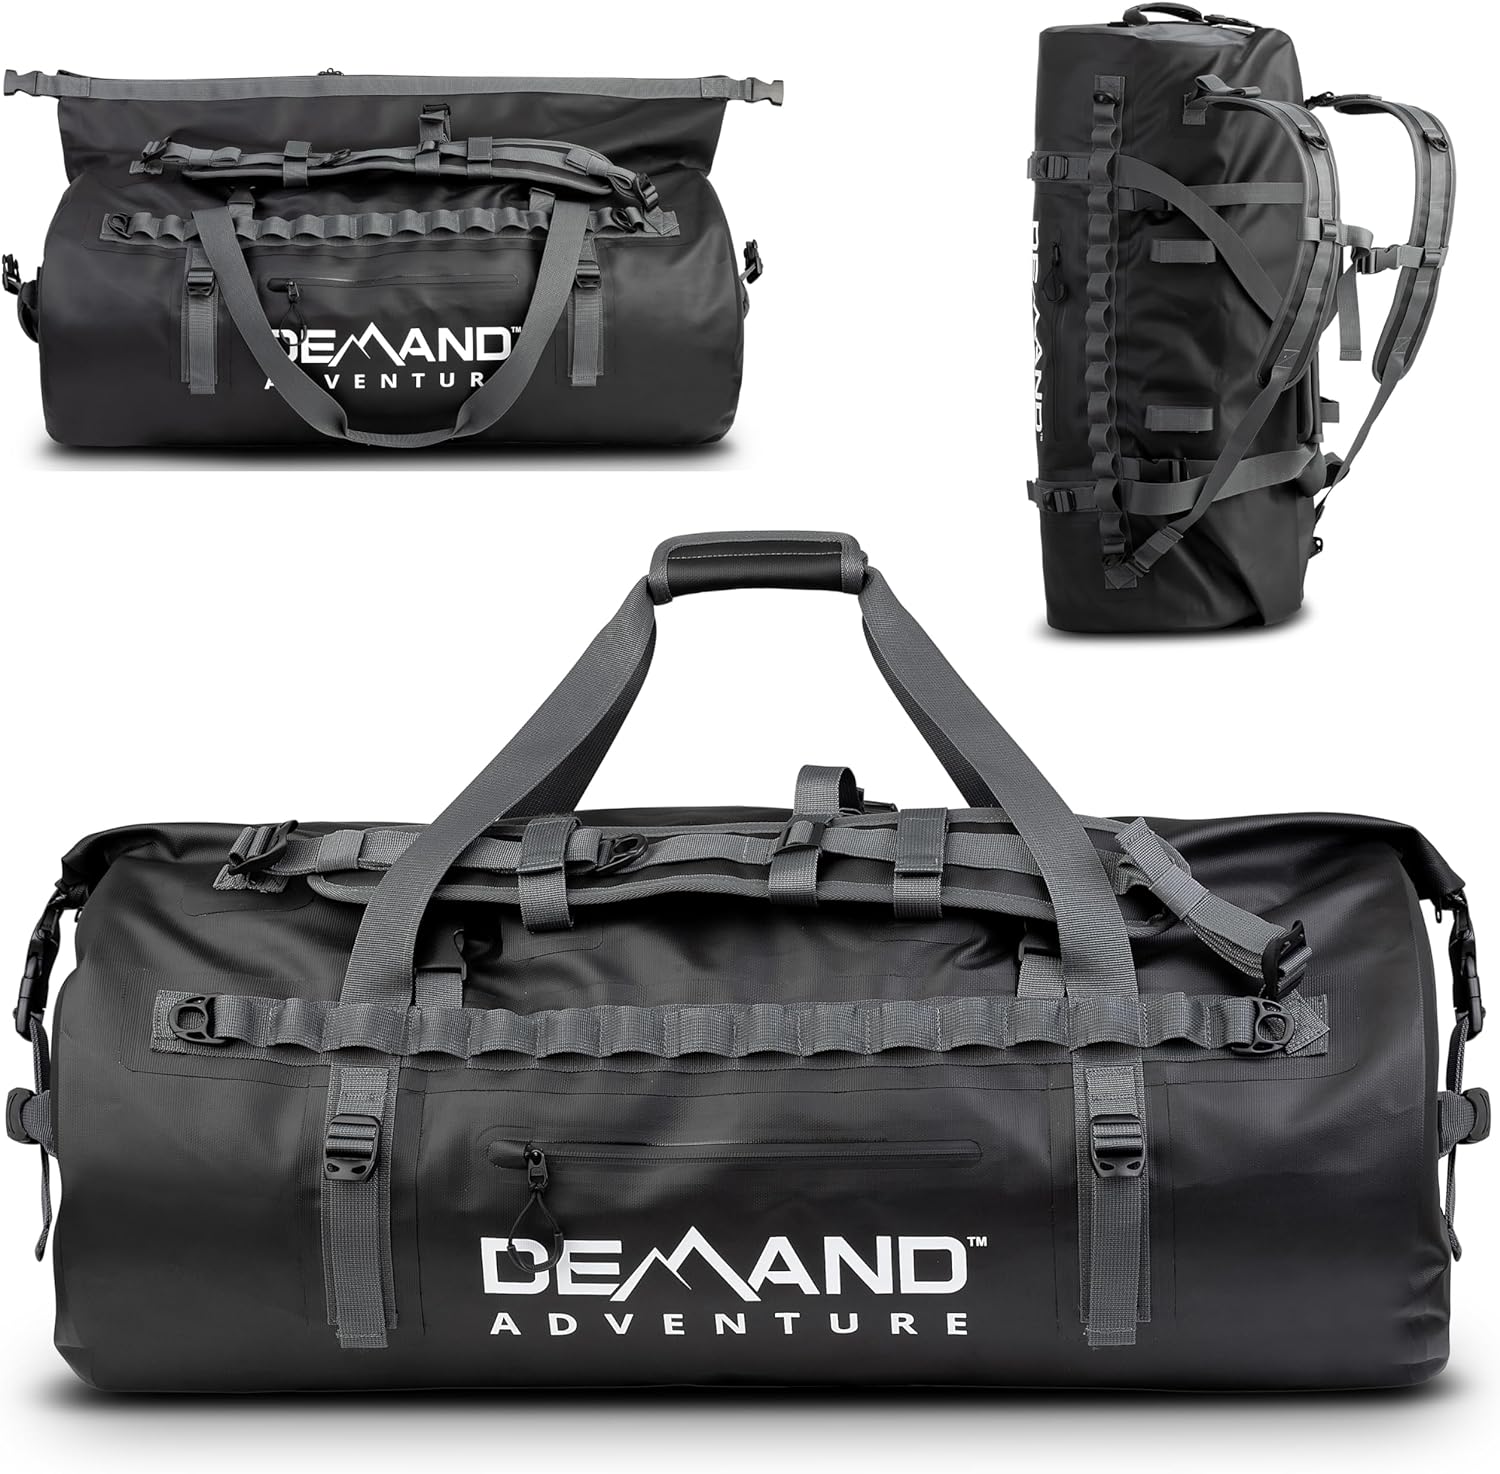 DEMAND ADVENTURE Premium Heavy Duty Waterproof 1680D Duffel Bag, 65L Rolltop Dry Backpack For Your Boating, Camping  Travel Adventures